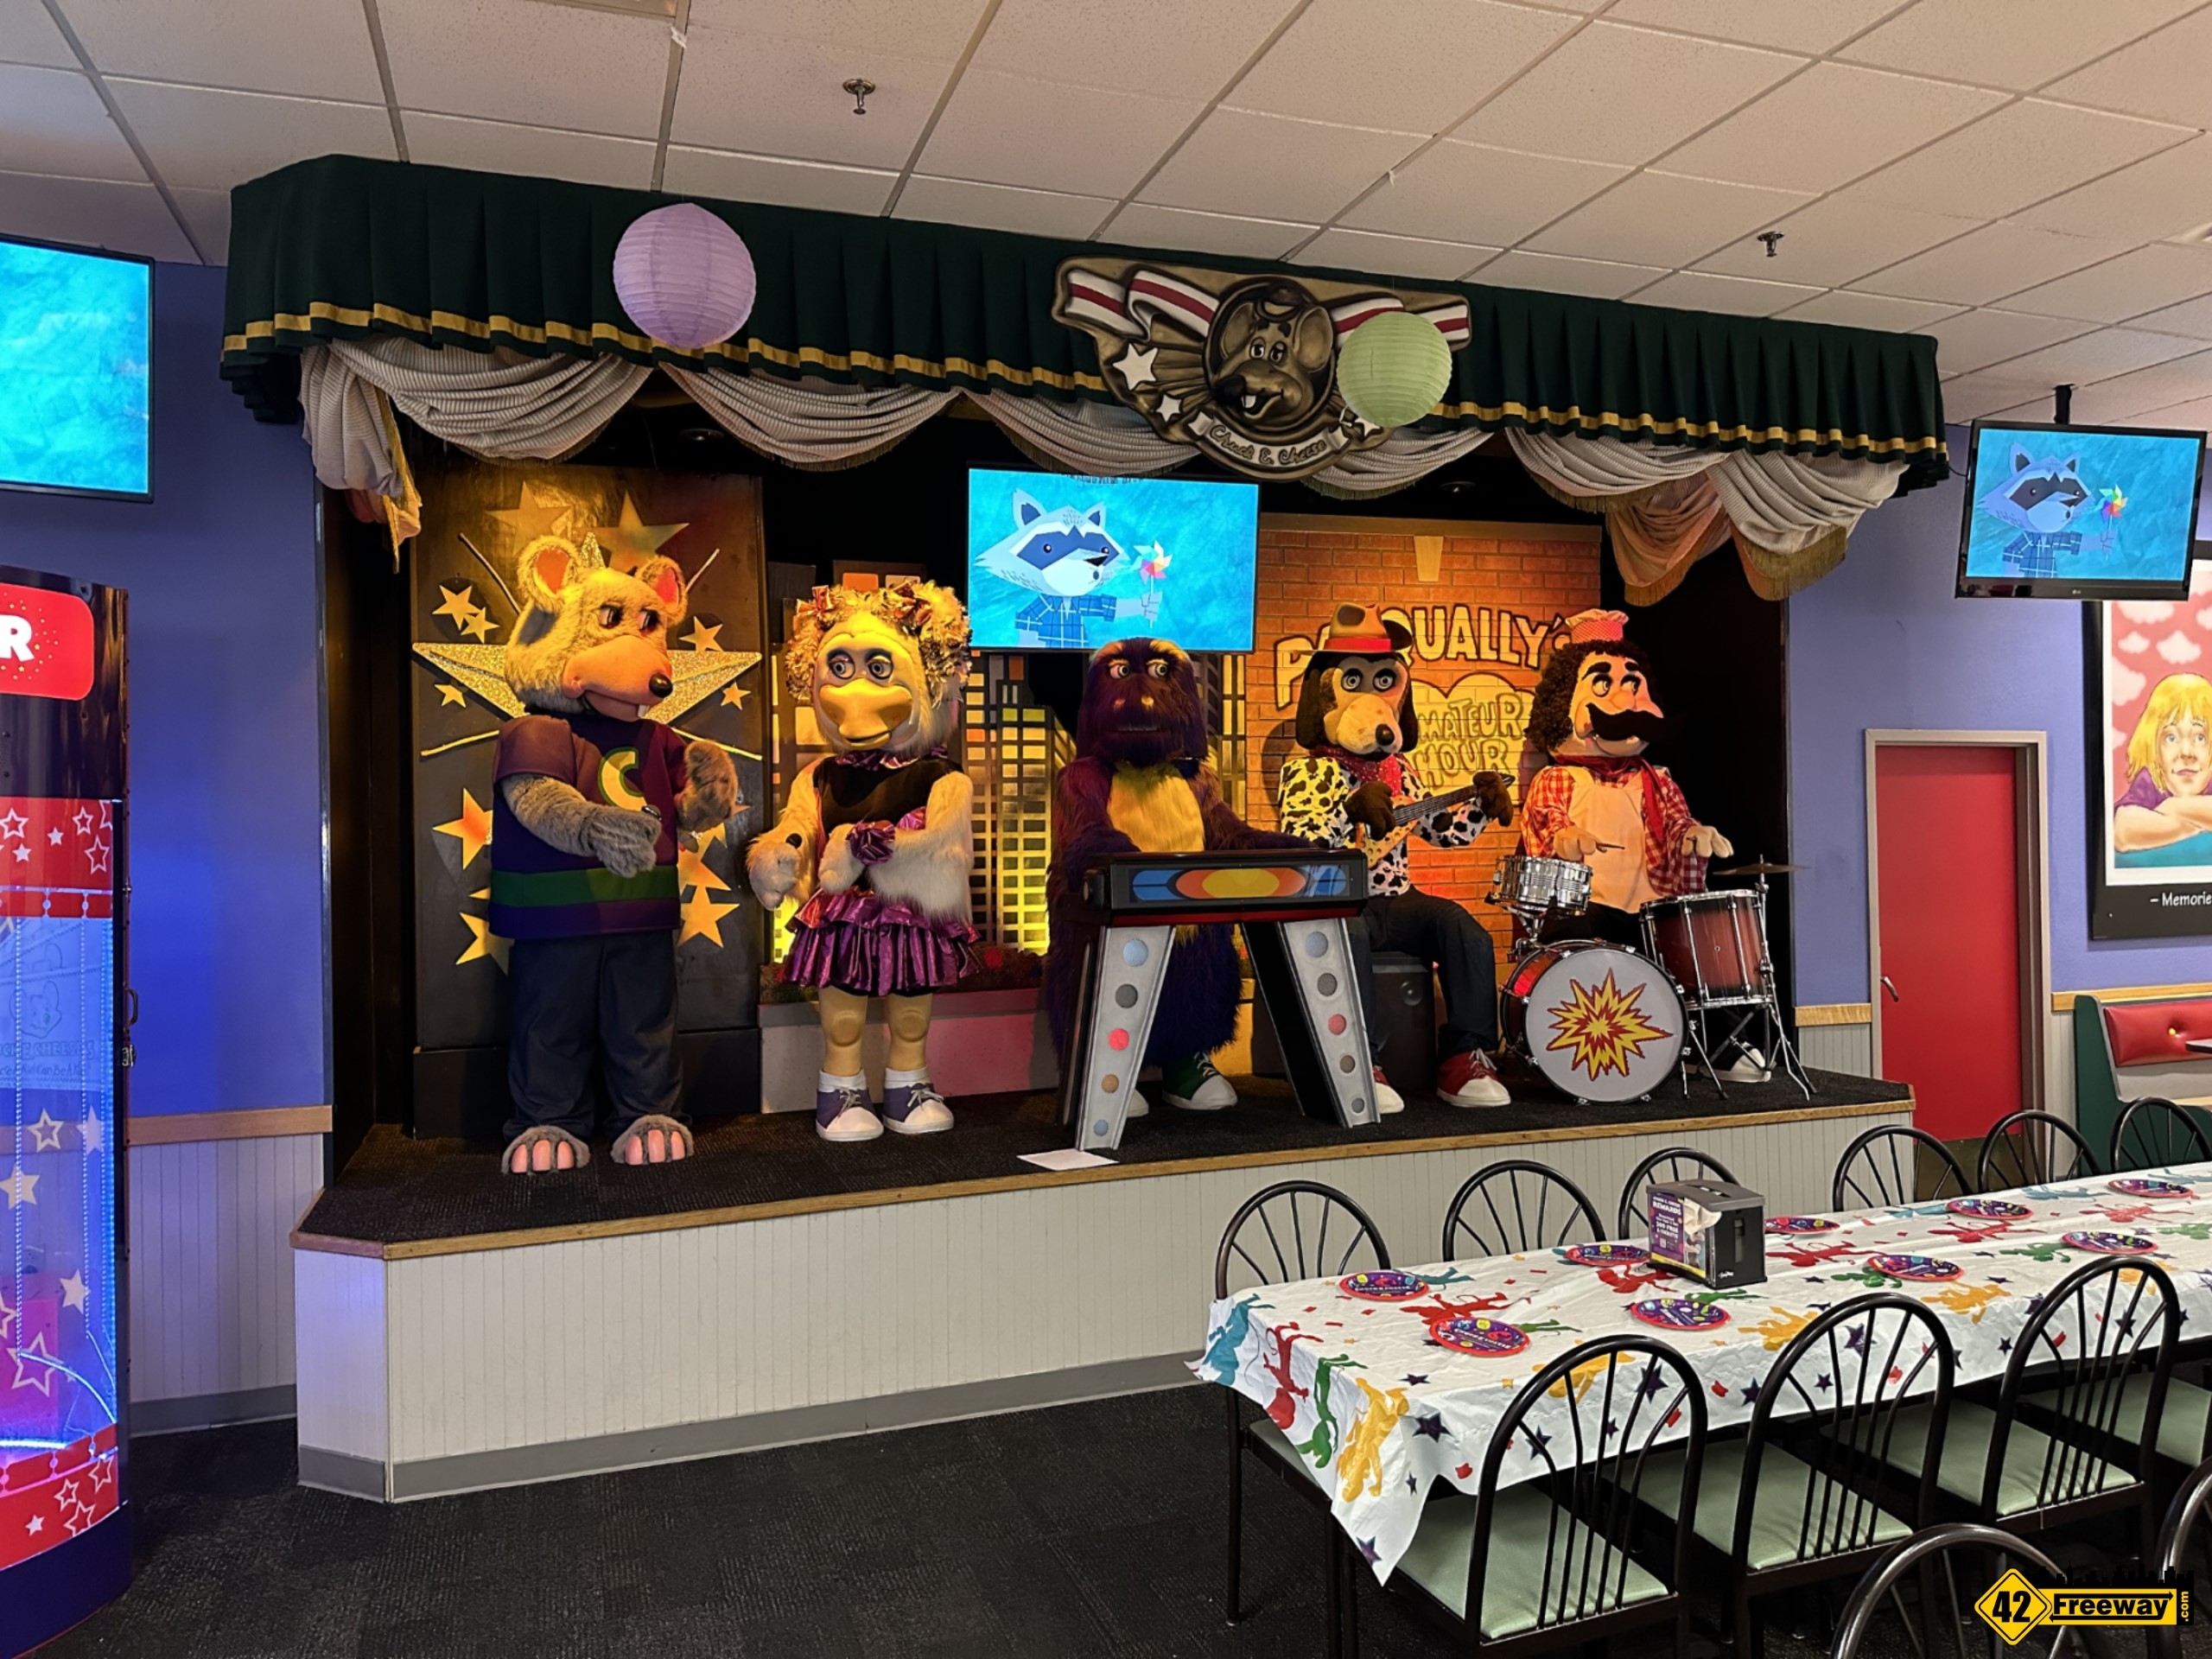 Deptford Chuck E. Cheese Remodel Starting. Last Few Weeks For